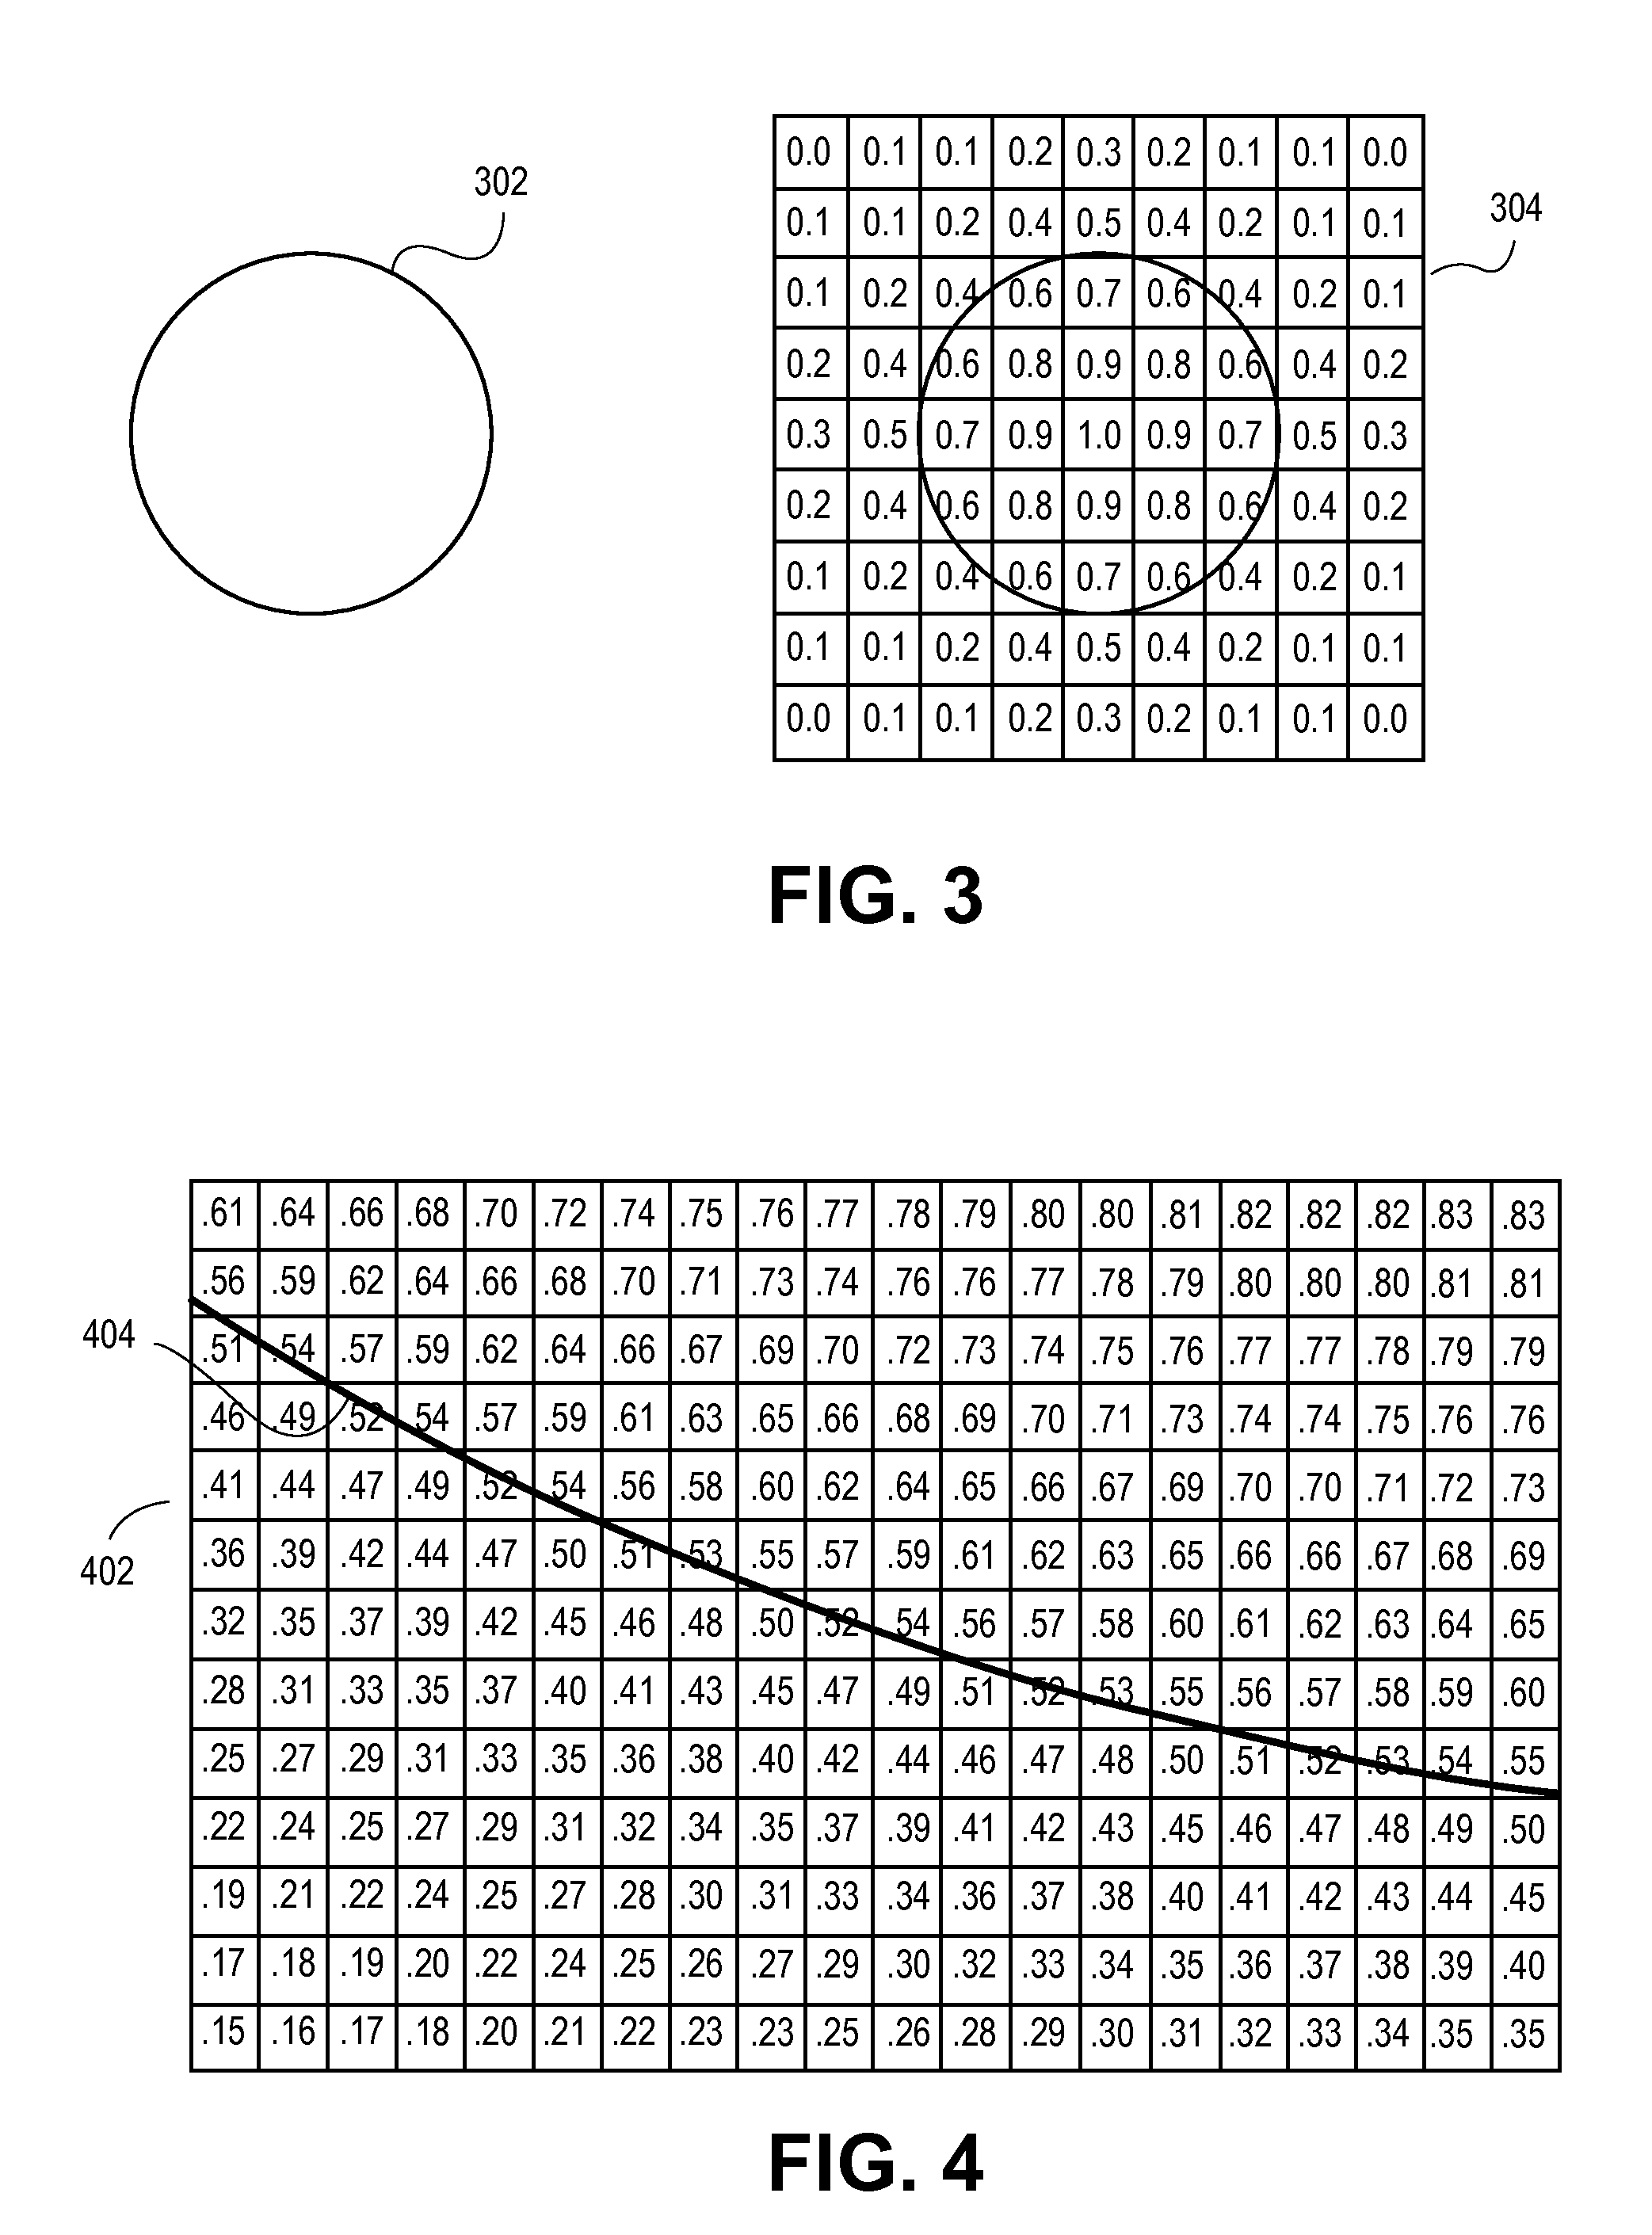 Method for design and manufacture of a reticle using a two-dimensional dosage map and charged particle beam lithography